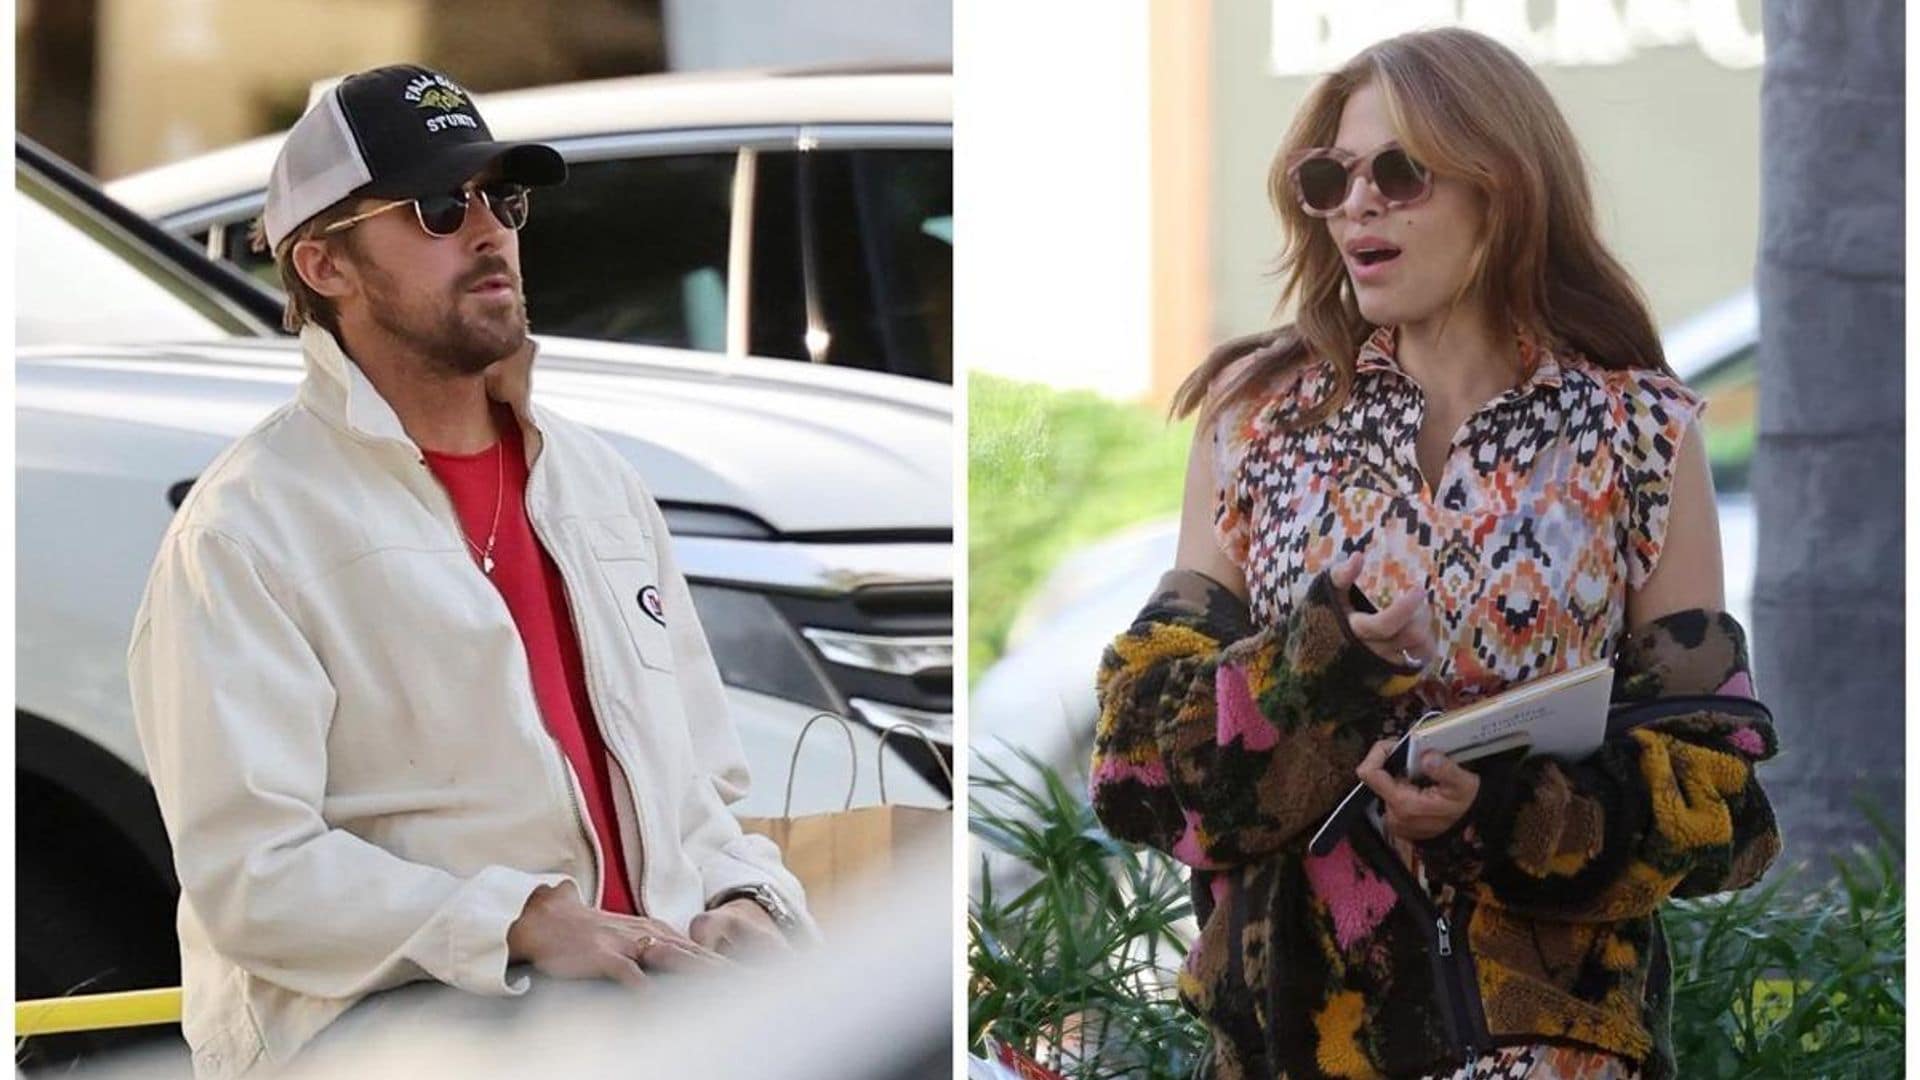 Ryan Gosling and Eva Mendes take their daughters to read books at the park